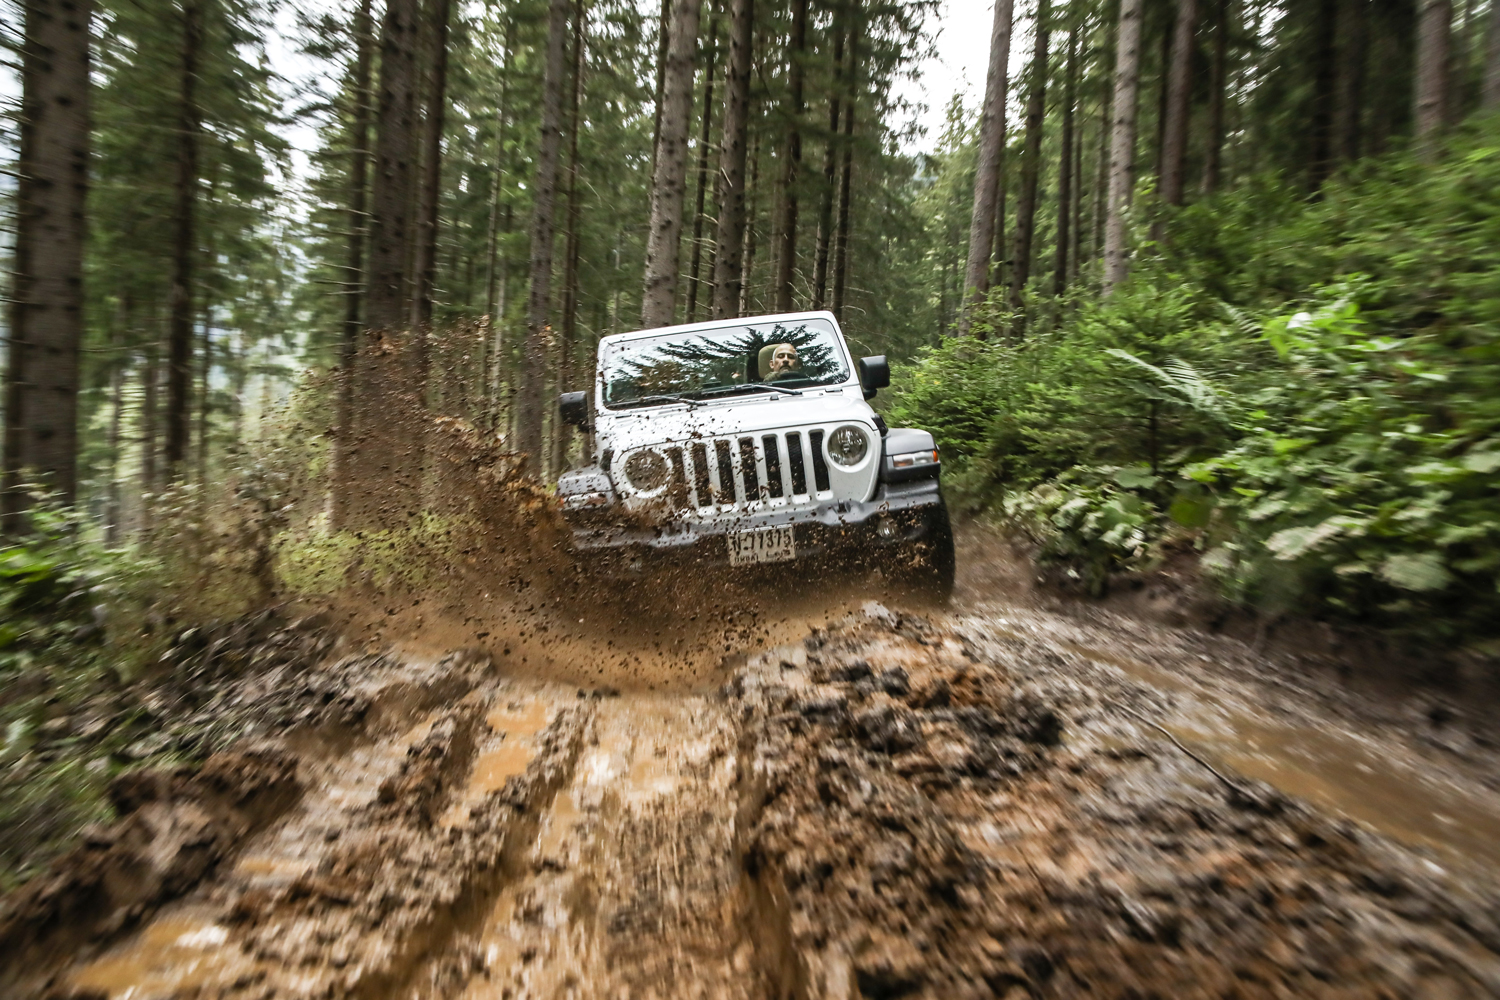 How do you update the mighty Jeep Wrangler? Slowly, and cautiously